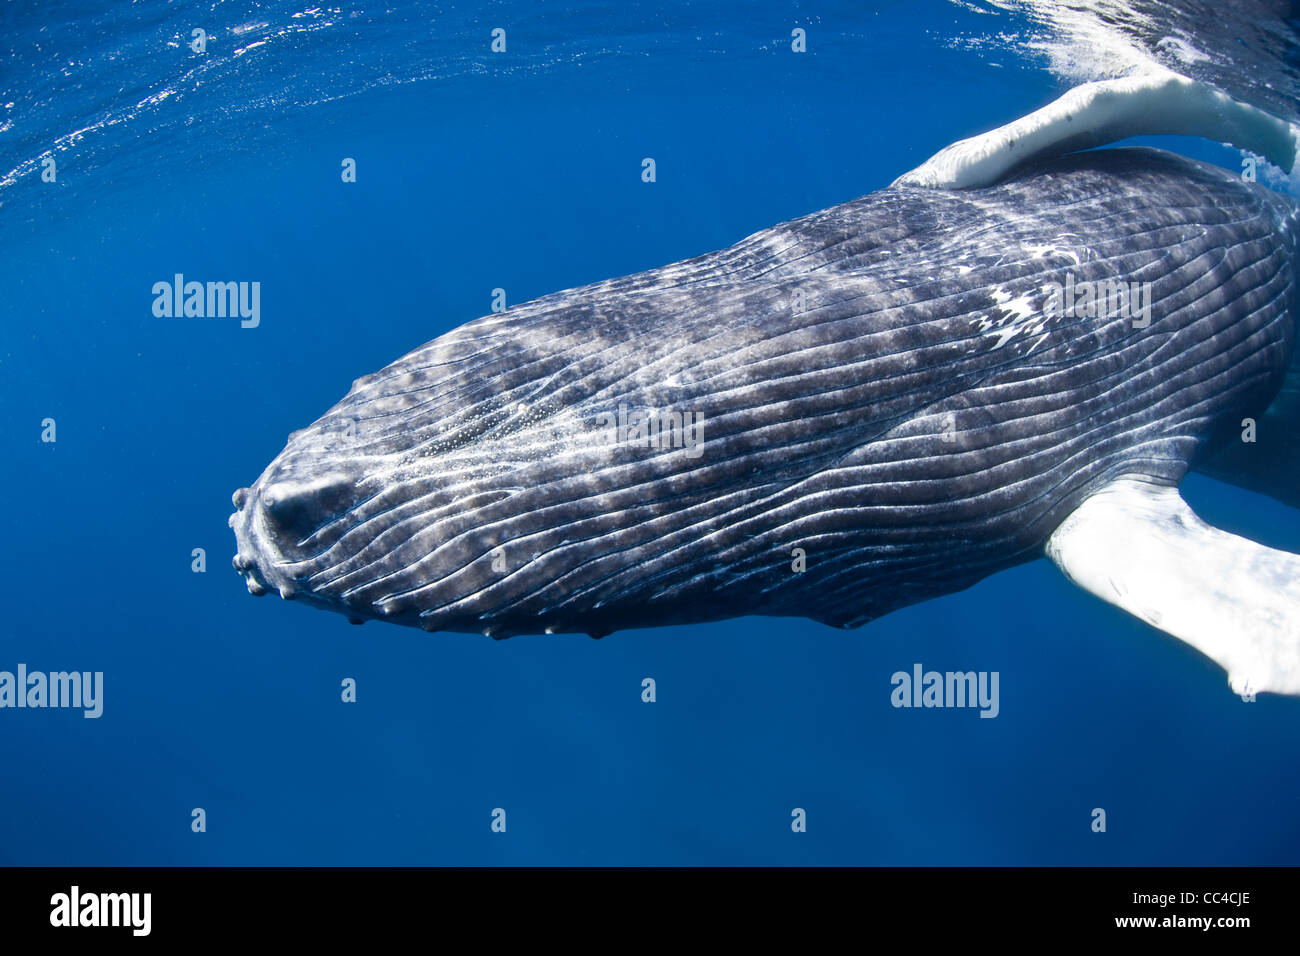 A young Humpback whale calf (Megaptera novaeangliae) plays at the surface in its calving grounds in the Caribbean Sea. Stock Photo